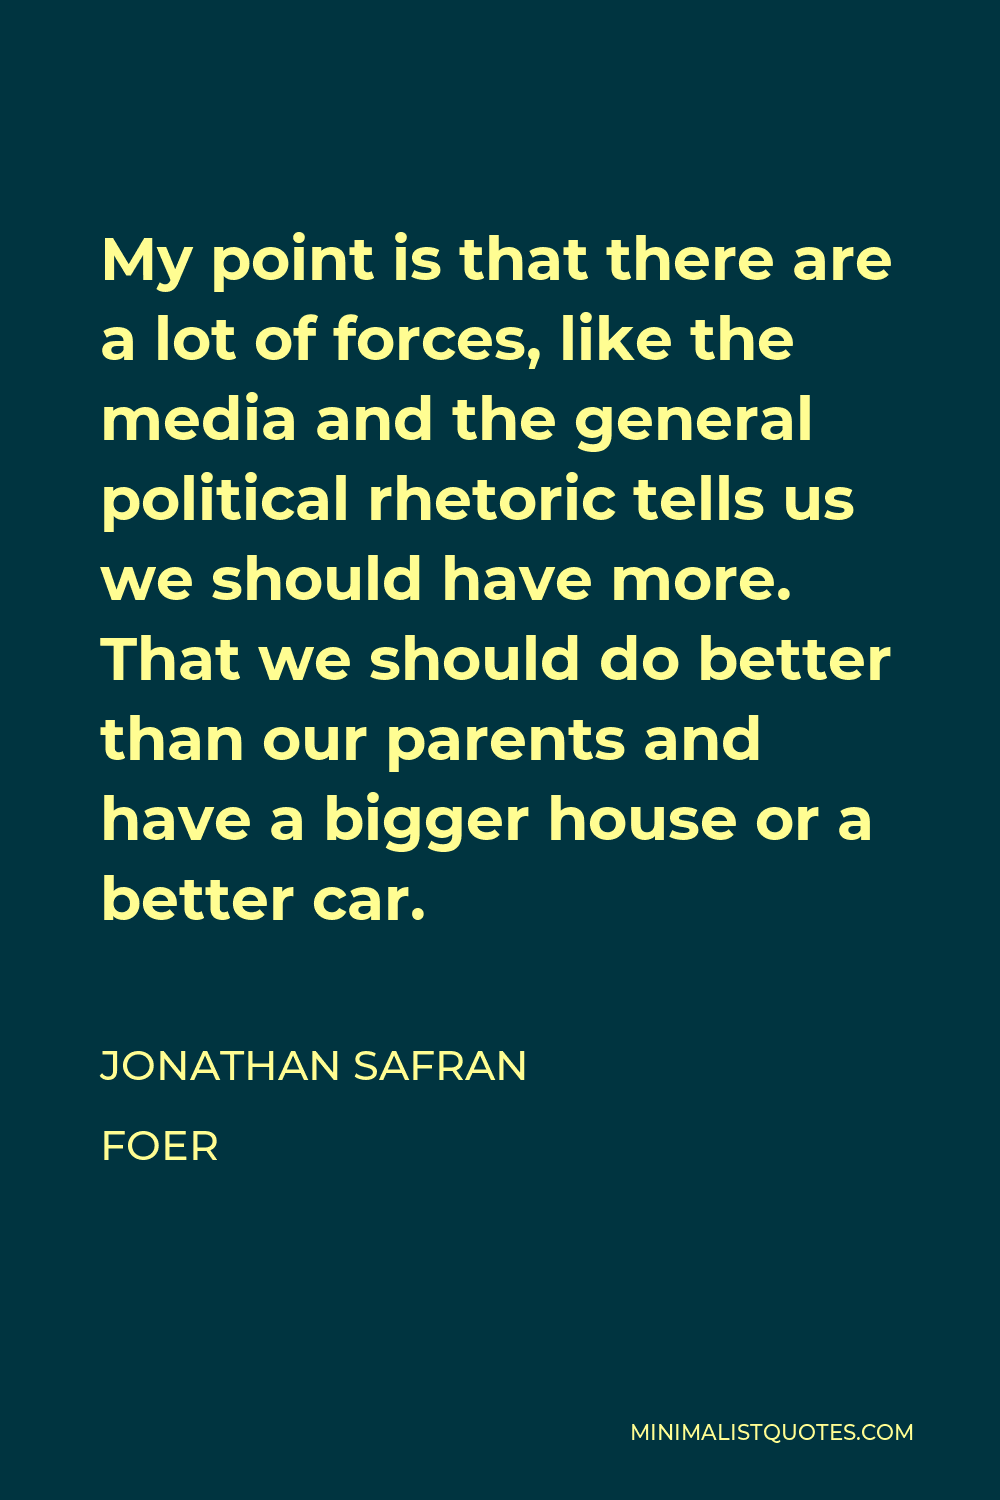 Jonathan Safran Foer Quote - My point is that there are a lot of forces, like the media and the general political rhetoric tells us we should have more. That we should do better than our parents and have a bigger house or a better car.